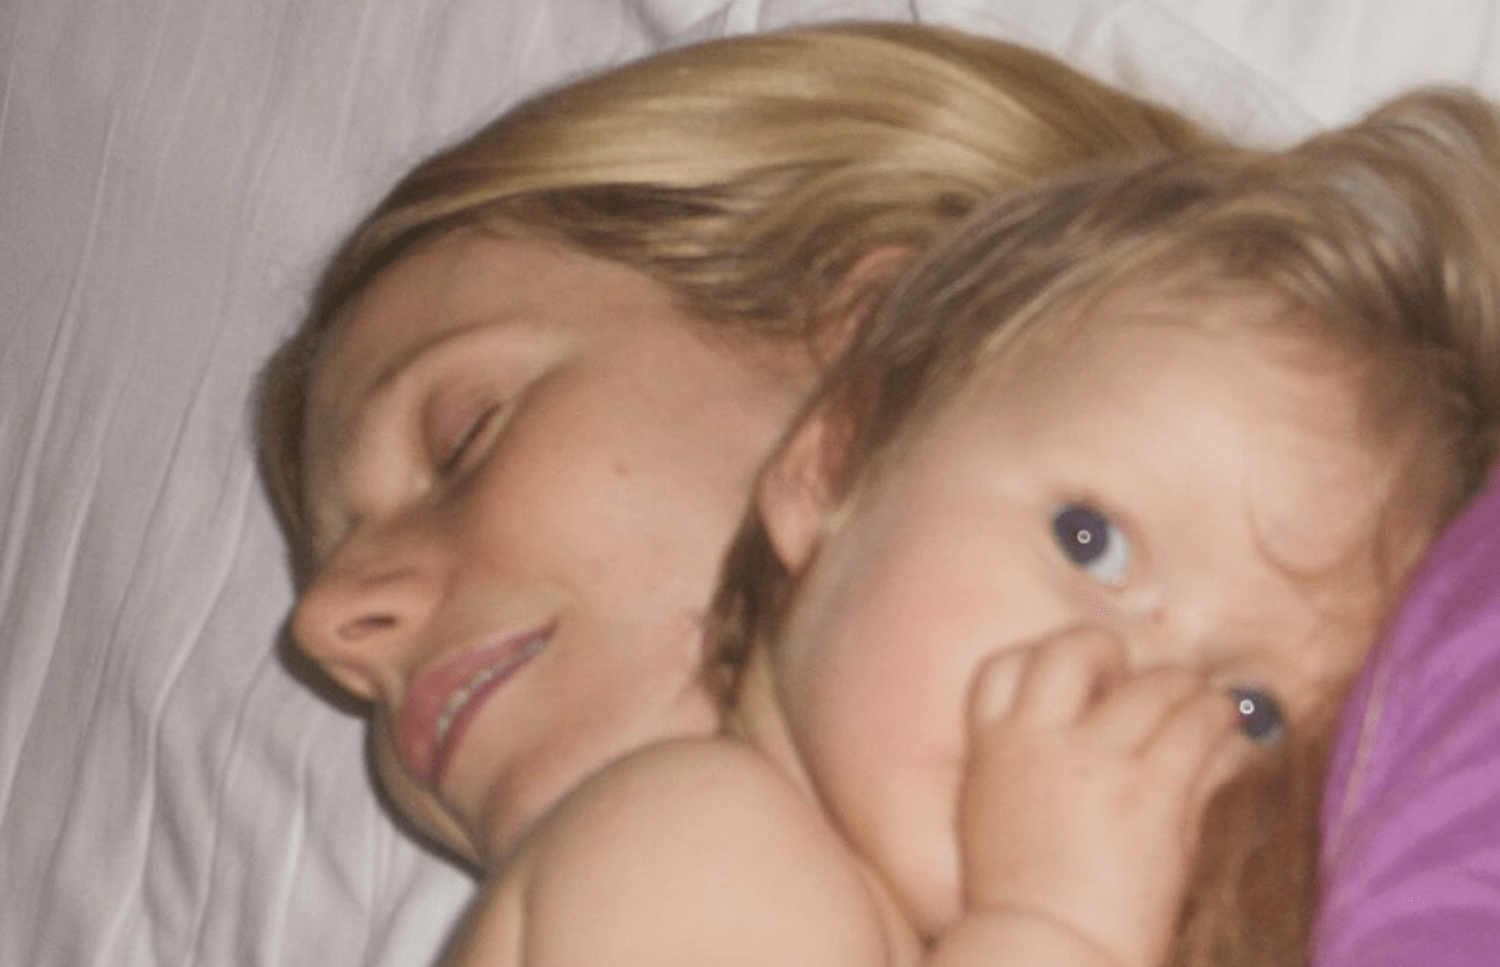 Gwyneth Paltrow shares baby pics of 20-year-old daughter Apple in birthday tribute